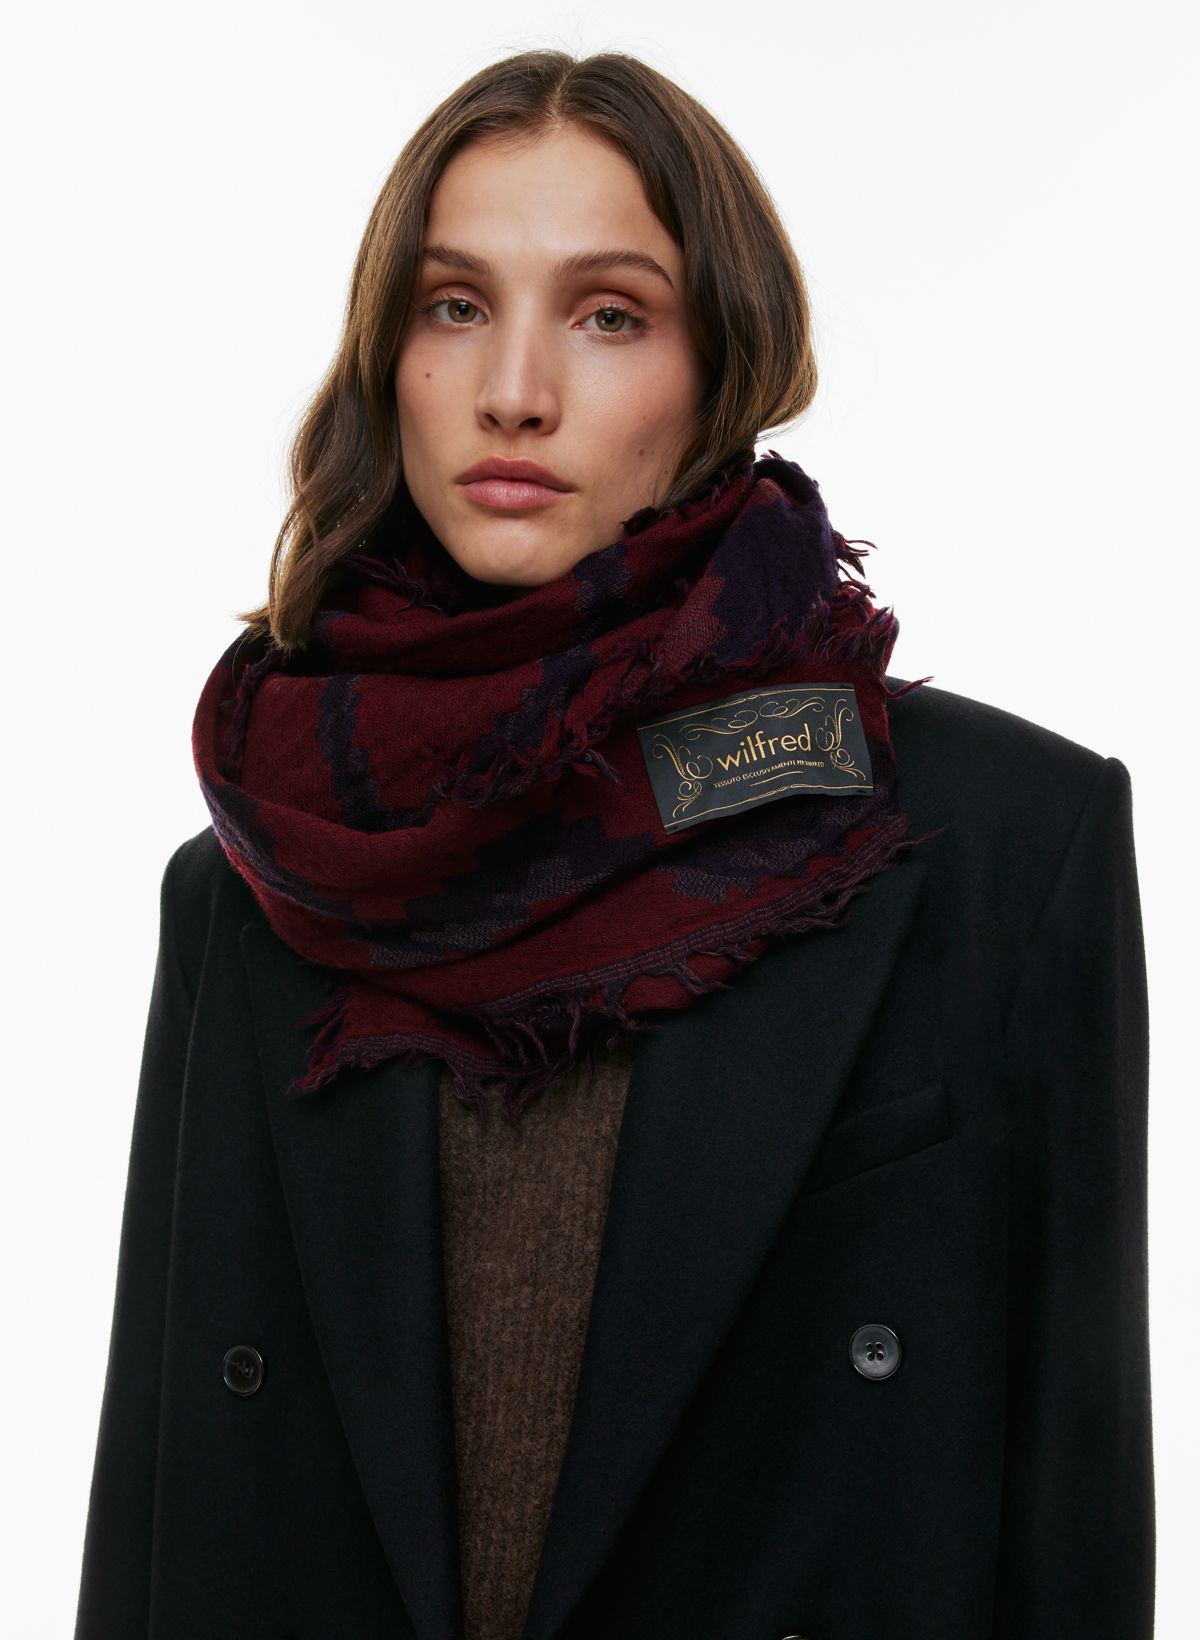 9 Ways to Wear a Blanket Scarf for Versatile, Cozy Style